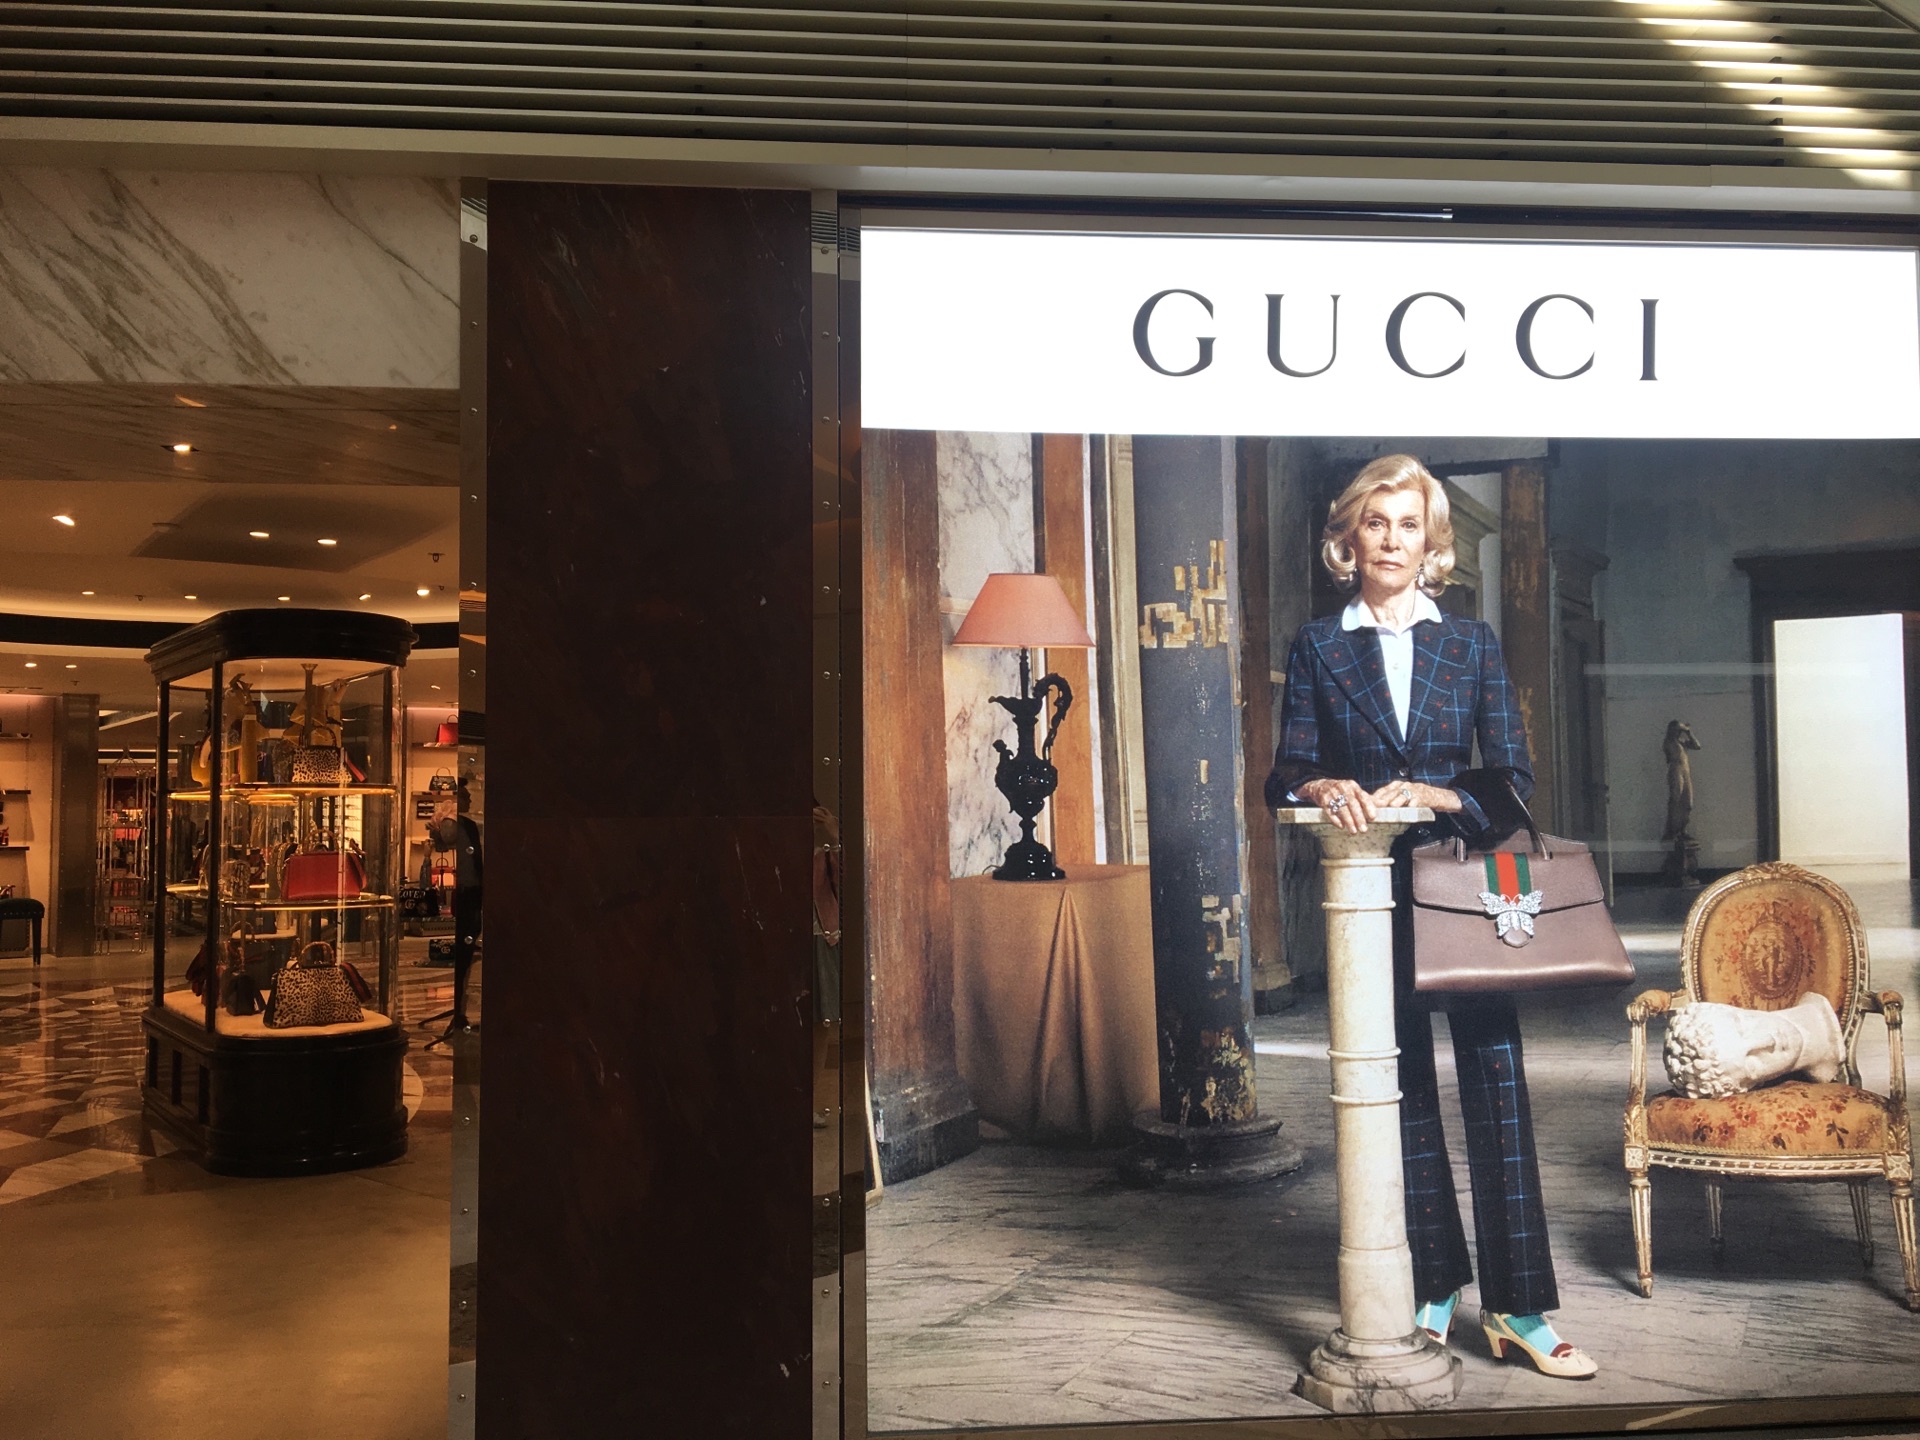 Teken Verrast zijn Prime GUCCI(Elements) travel guidebook –must visit attractions in Hong Kong –  GUCCI(Elements) nearby recommendation – Trip.com